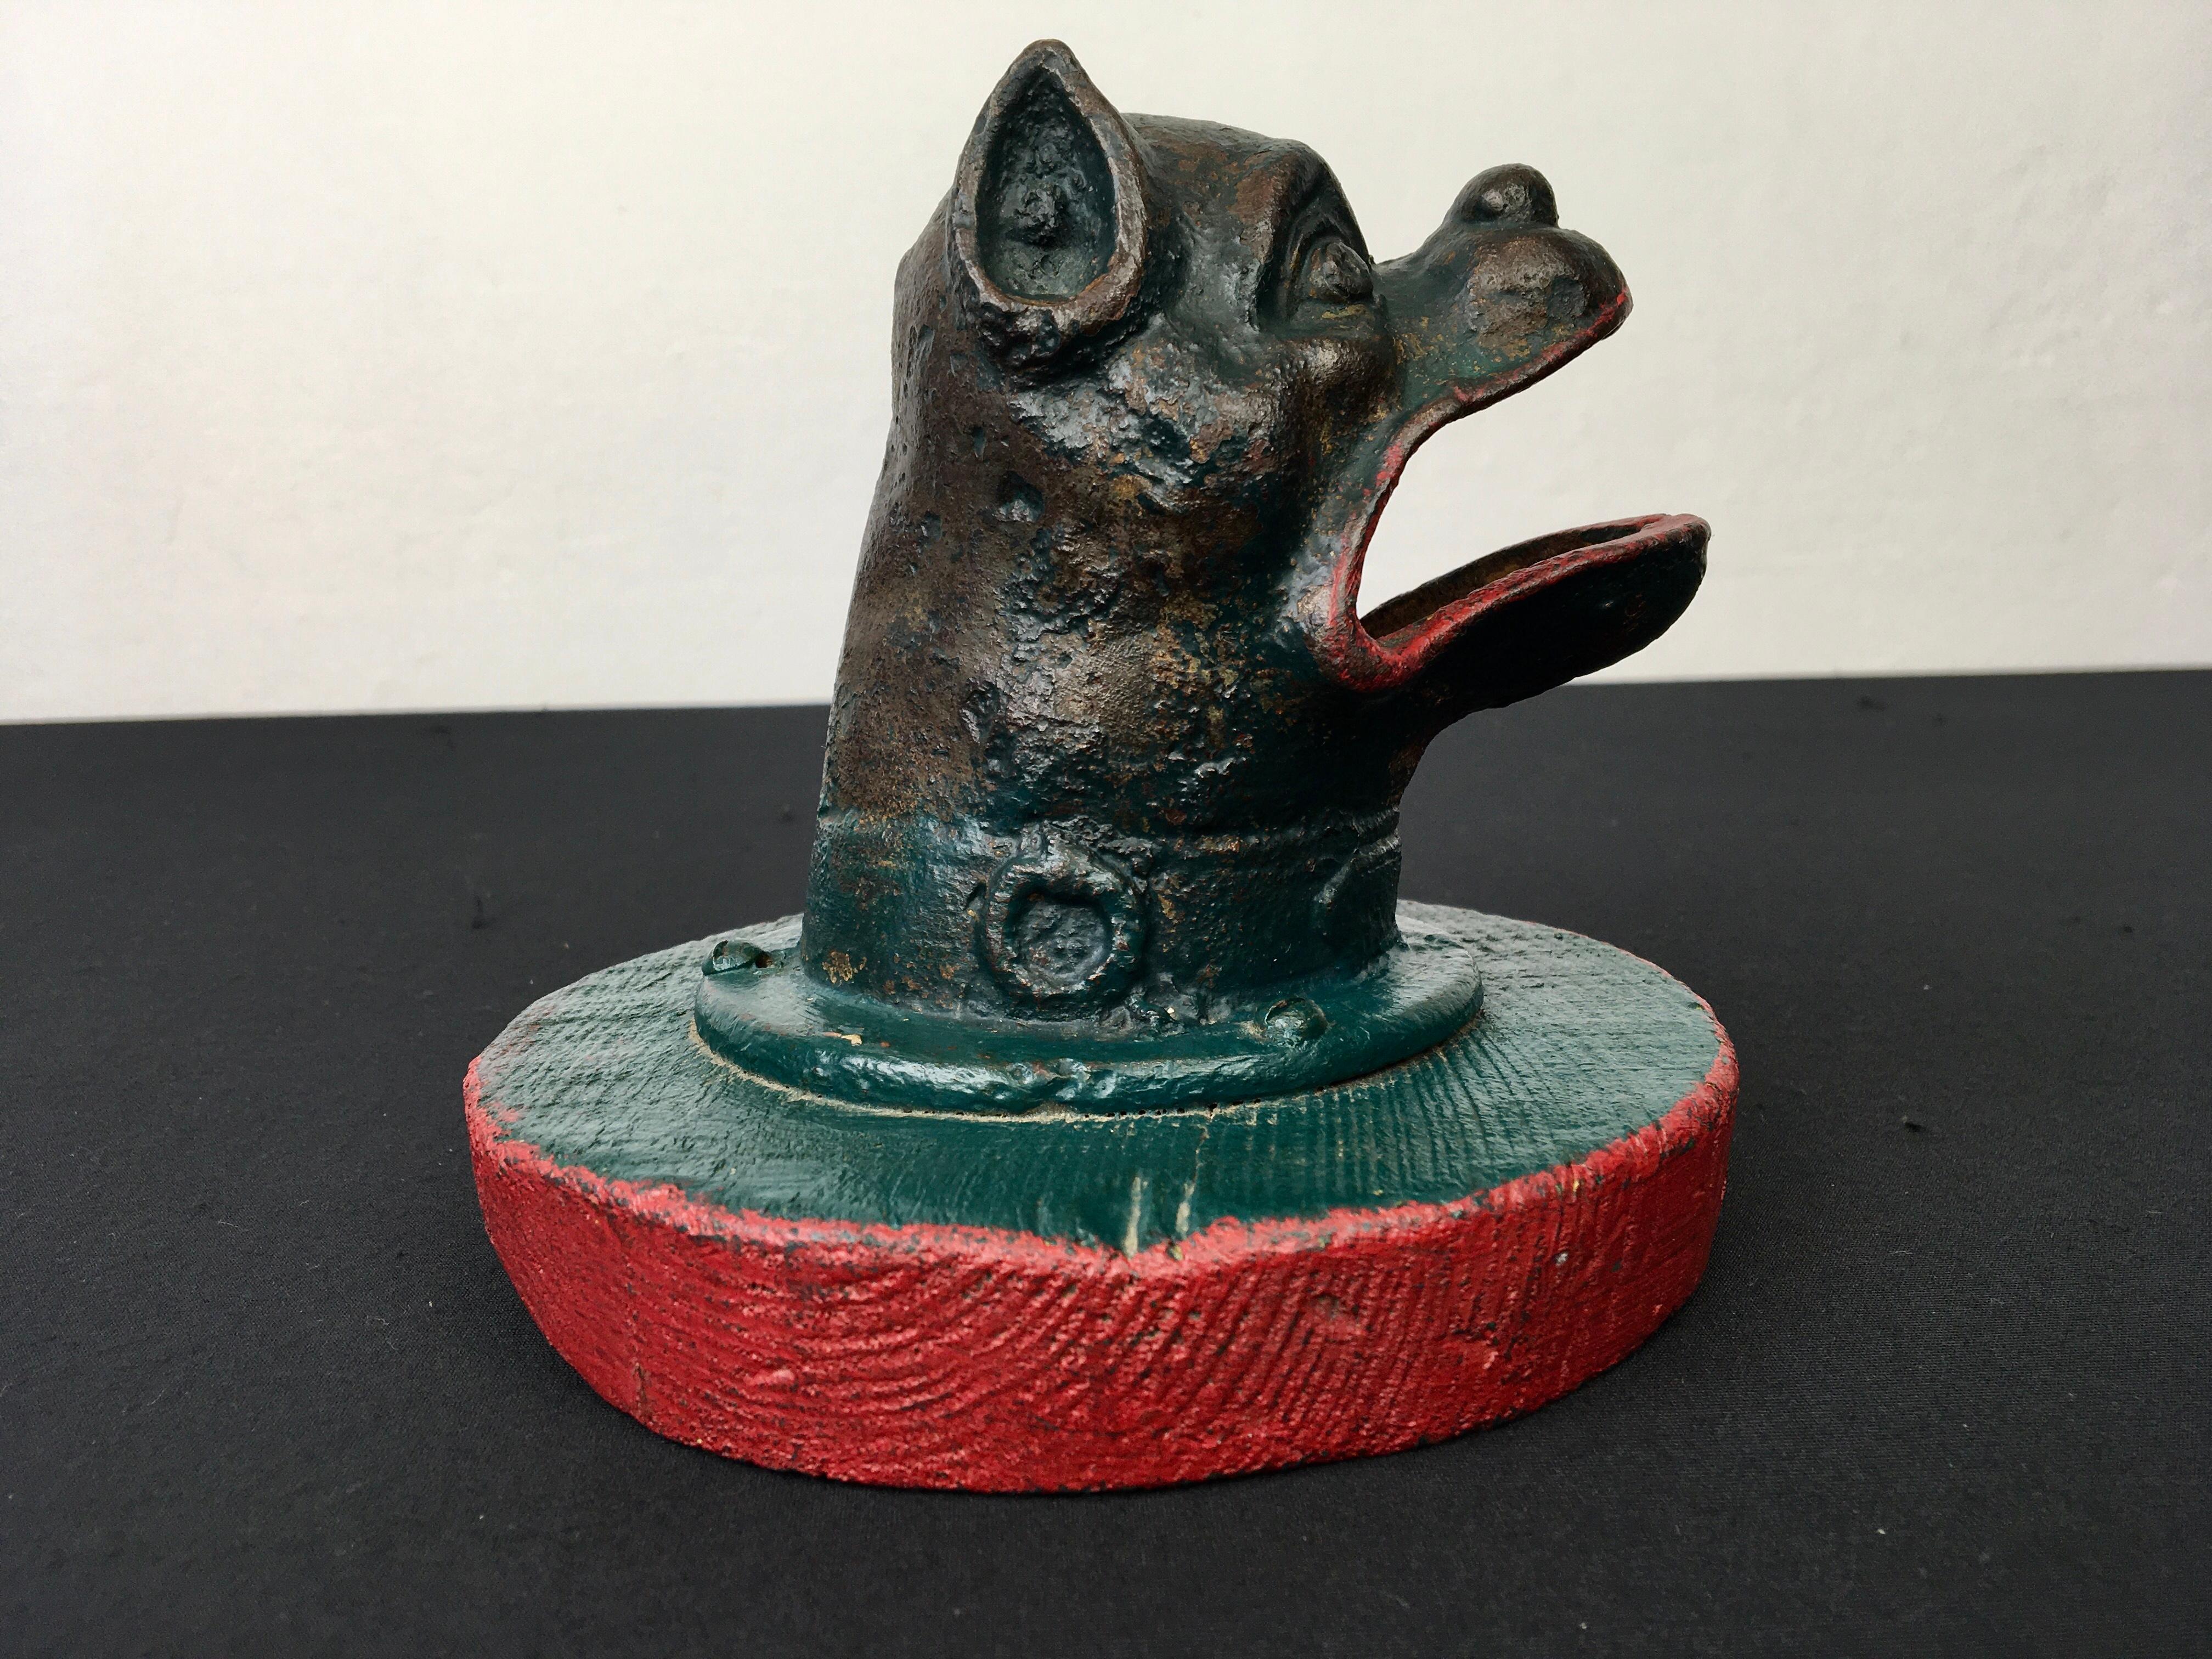 French Bulldog Head antique coin throwing game, frog game  For Sale